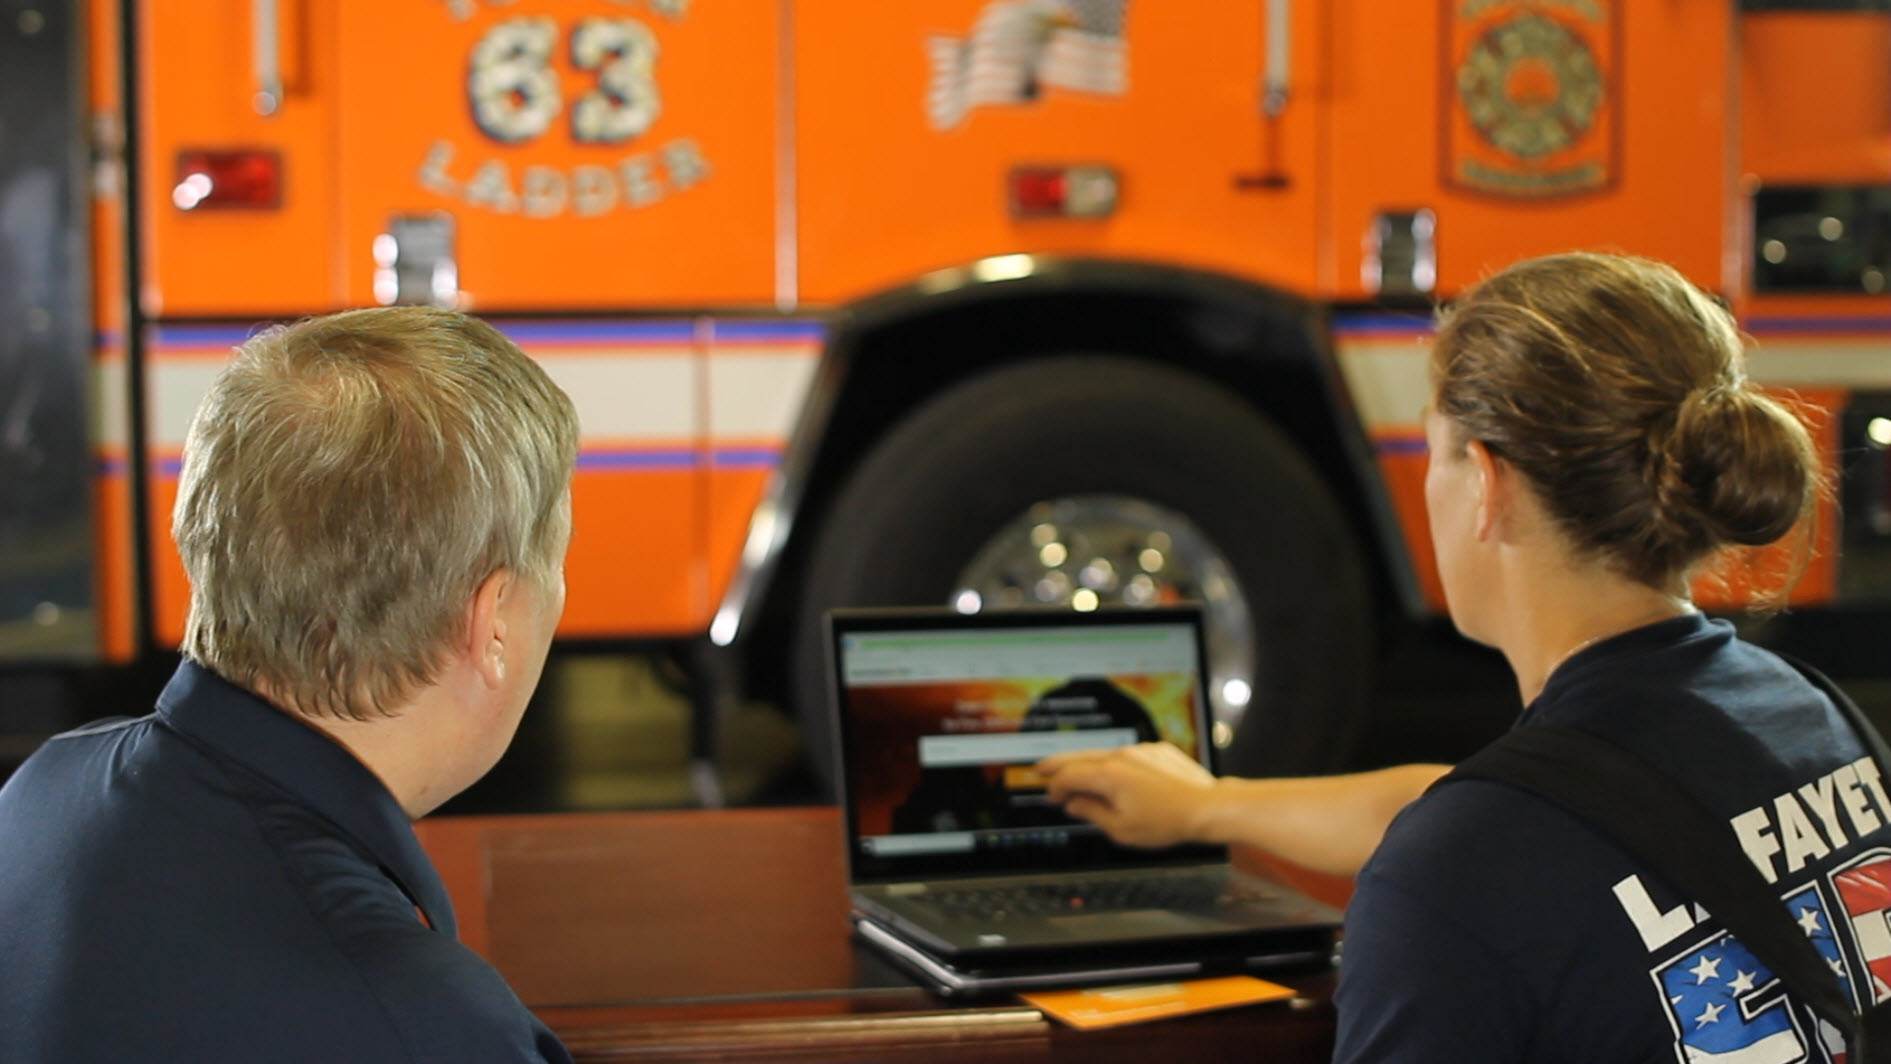 Two firefighters using ResponderHelp on a laptop in the station